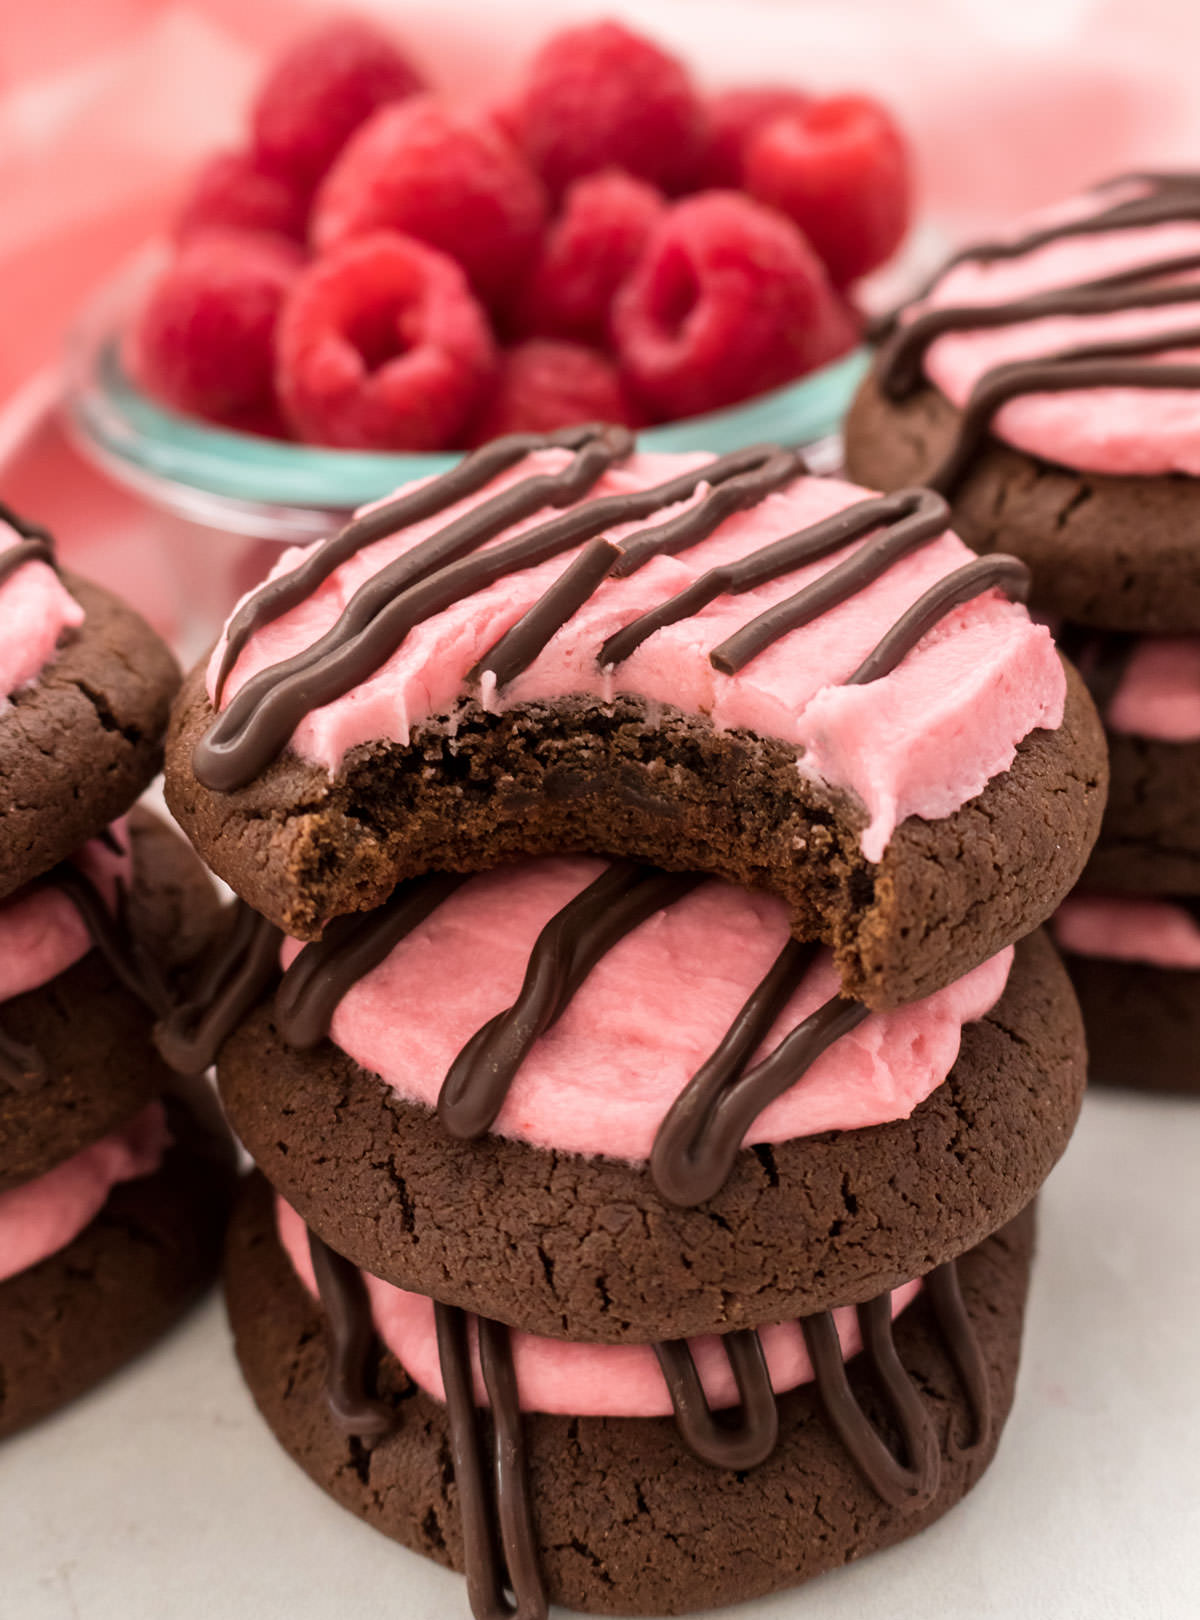 Closeup on a stack of Chocolate Cookies with Raspberry Frosting sitting on a table in front of a glass bowl filled with fresh Raspberries.